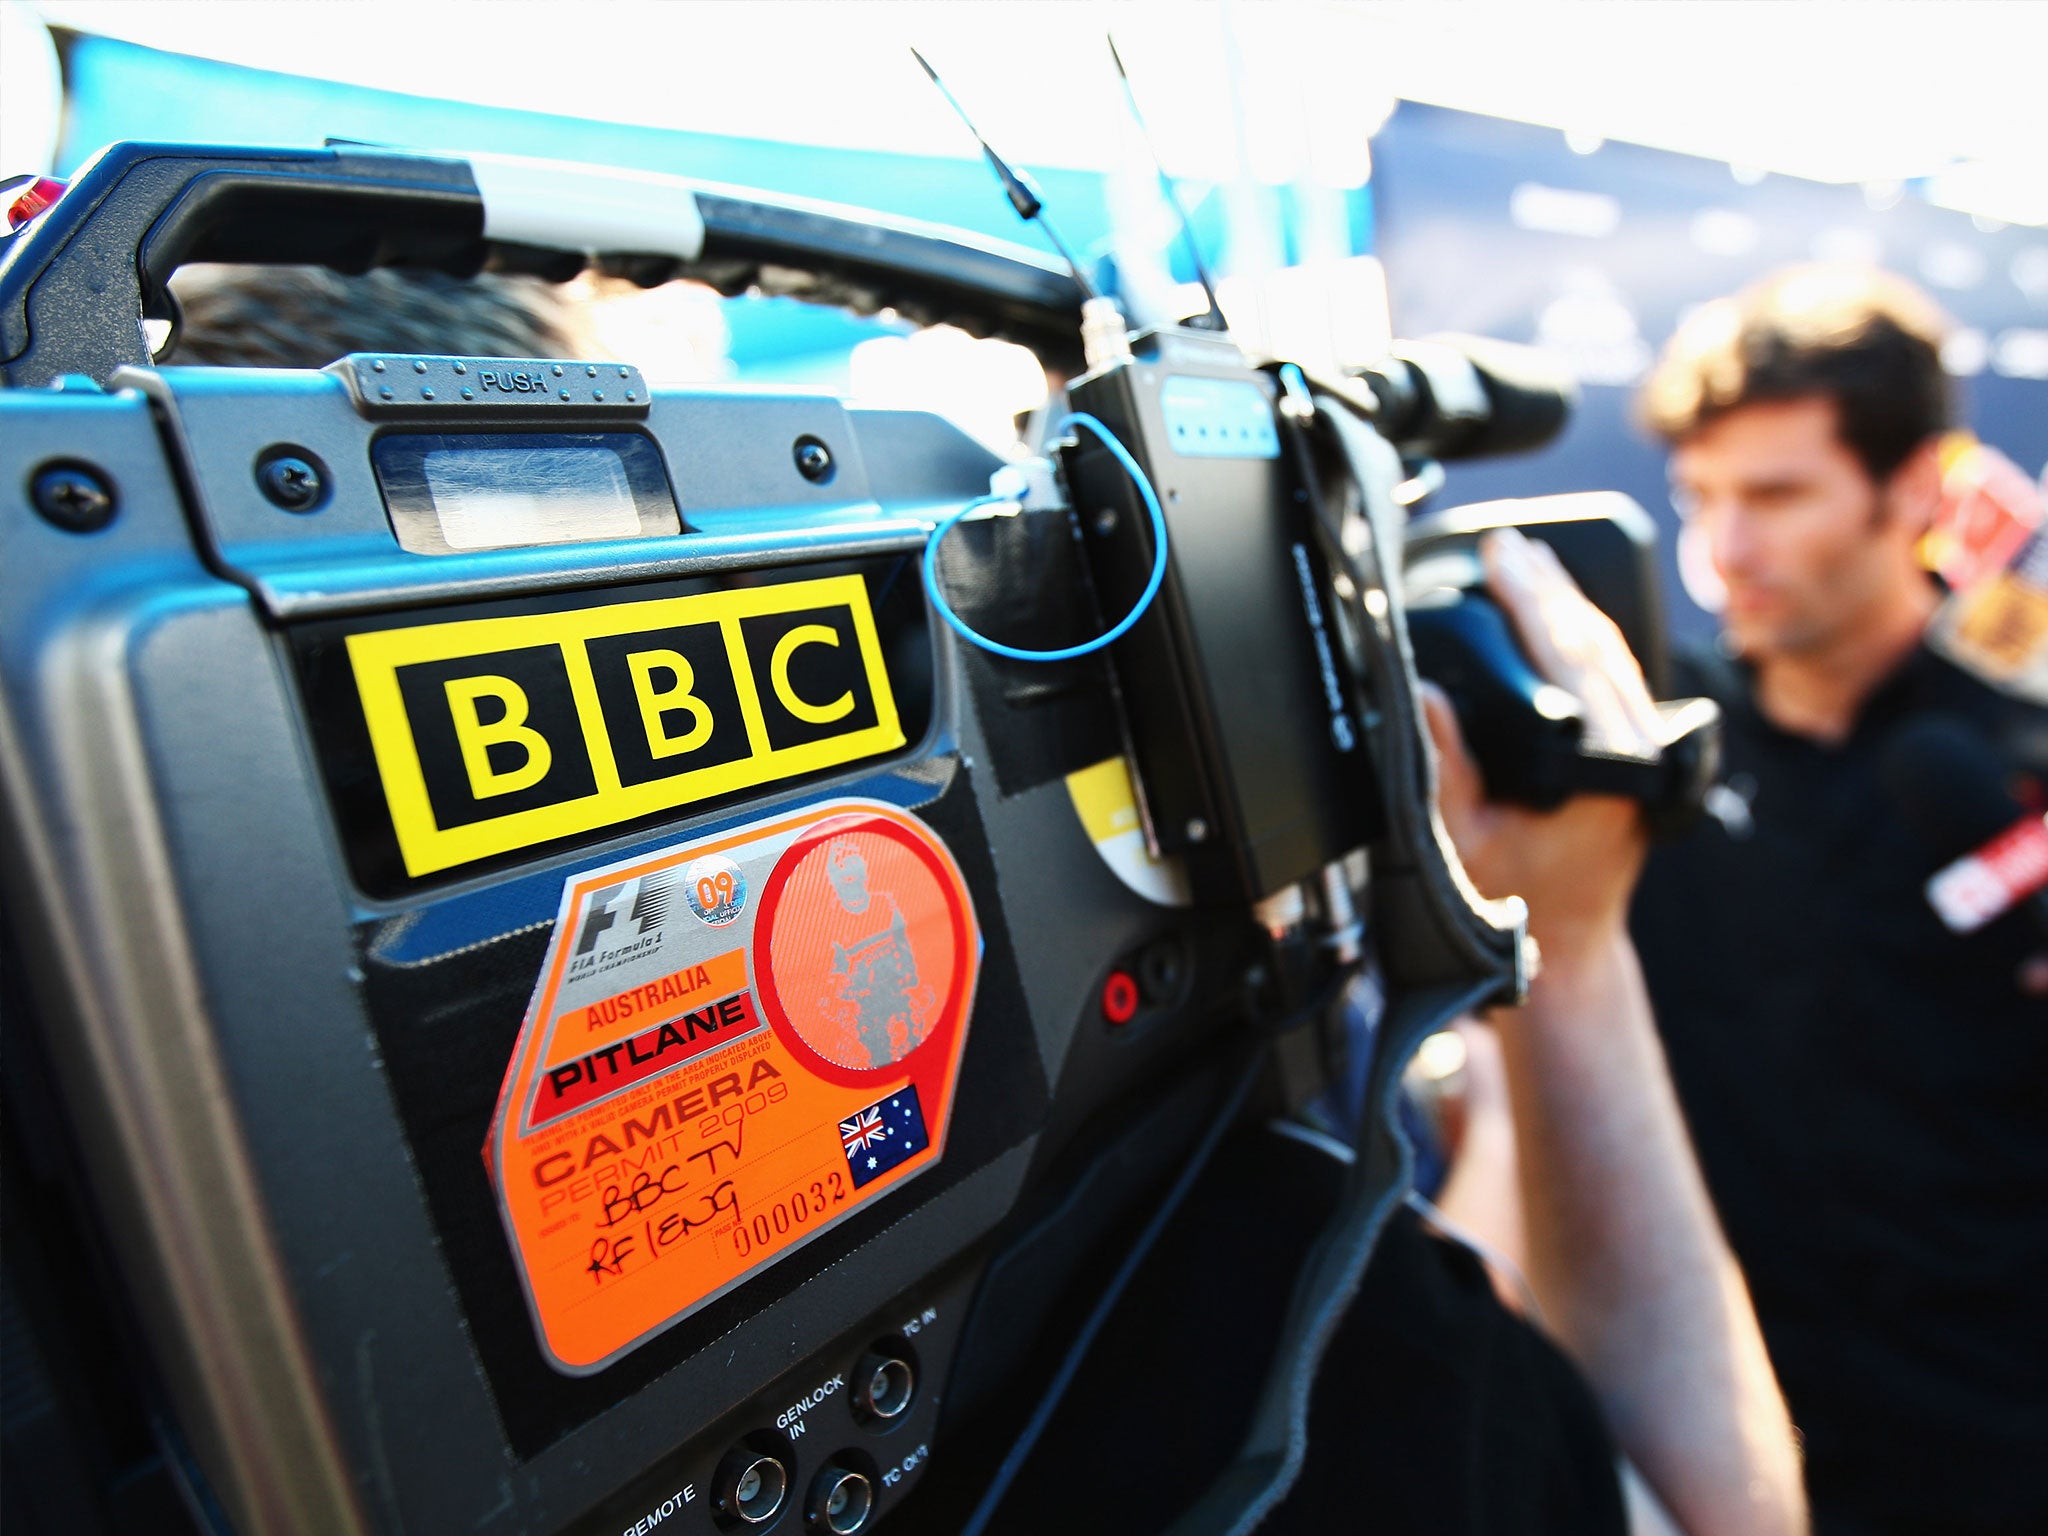 The BBC has come under fire for paying male stars more than their female counterparts